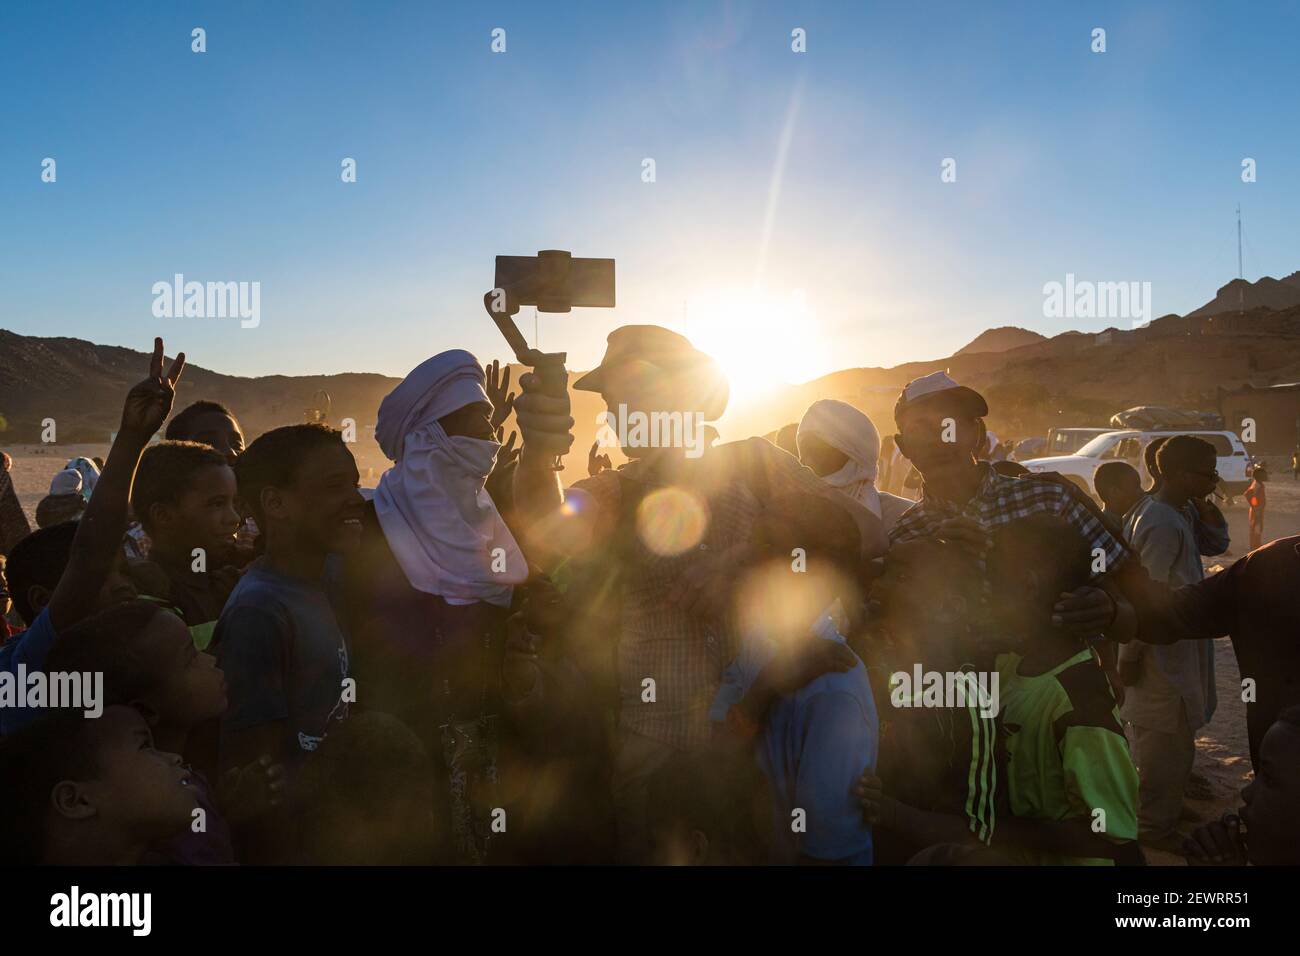 Backlight of a crowd of children and Tuareg men, Oasis of Timia, Air Mountains, Niger, Africa Stock Photo